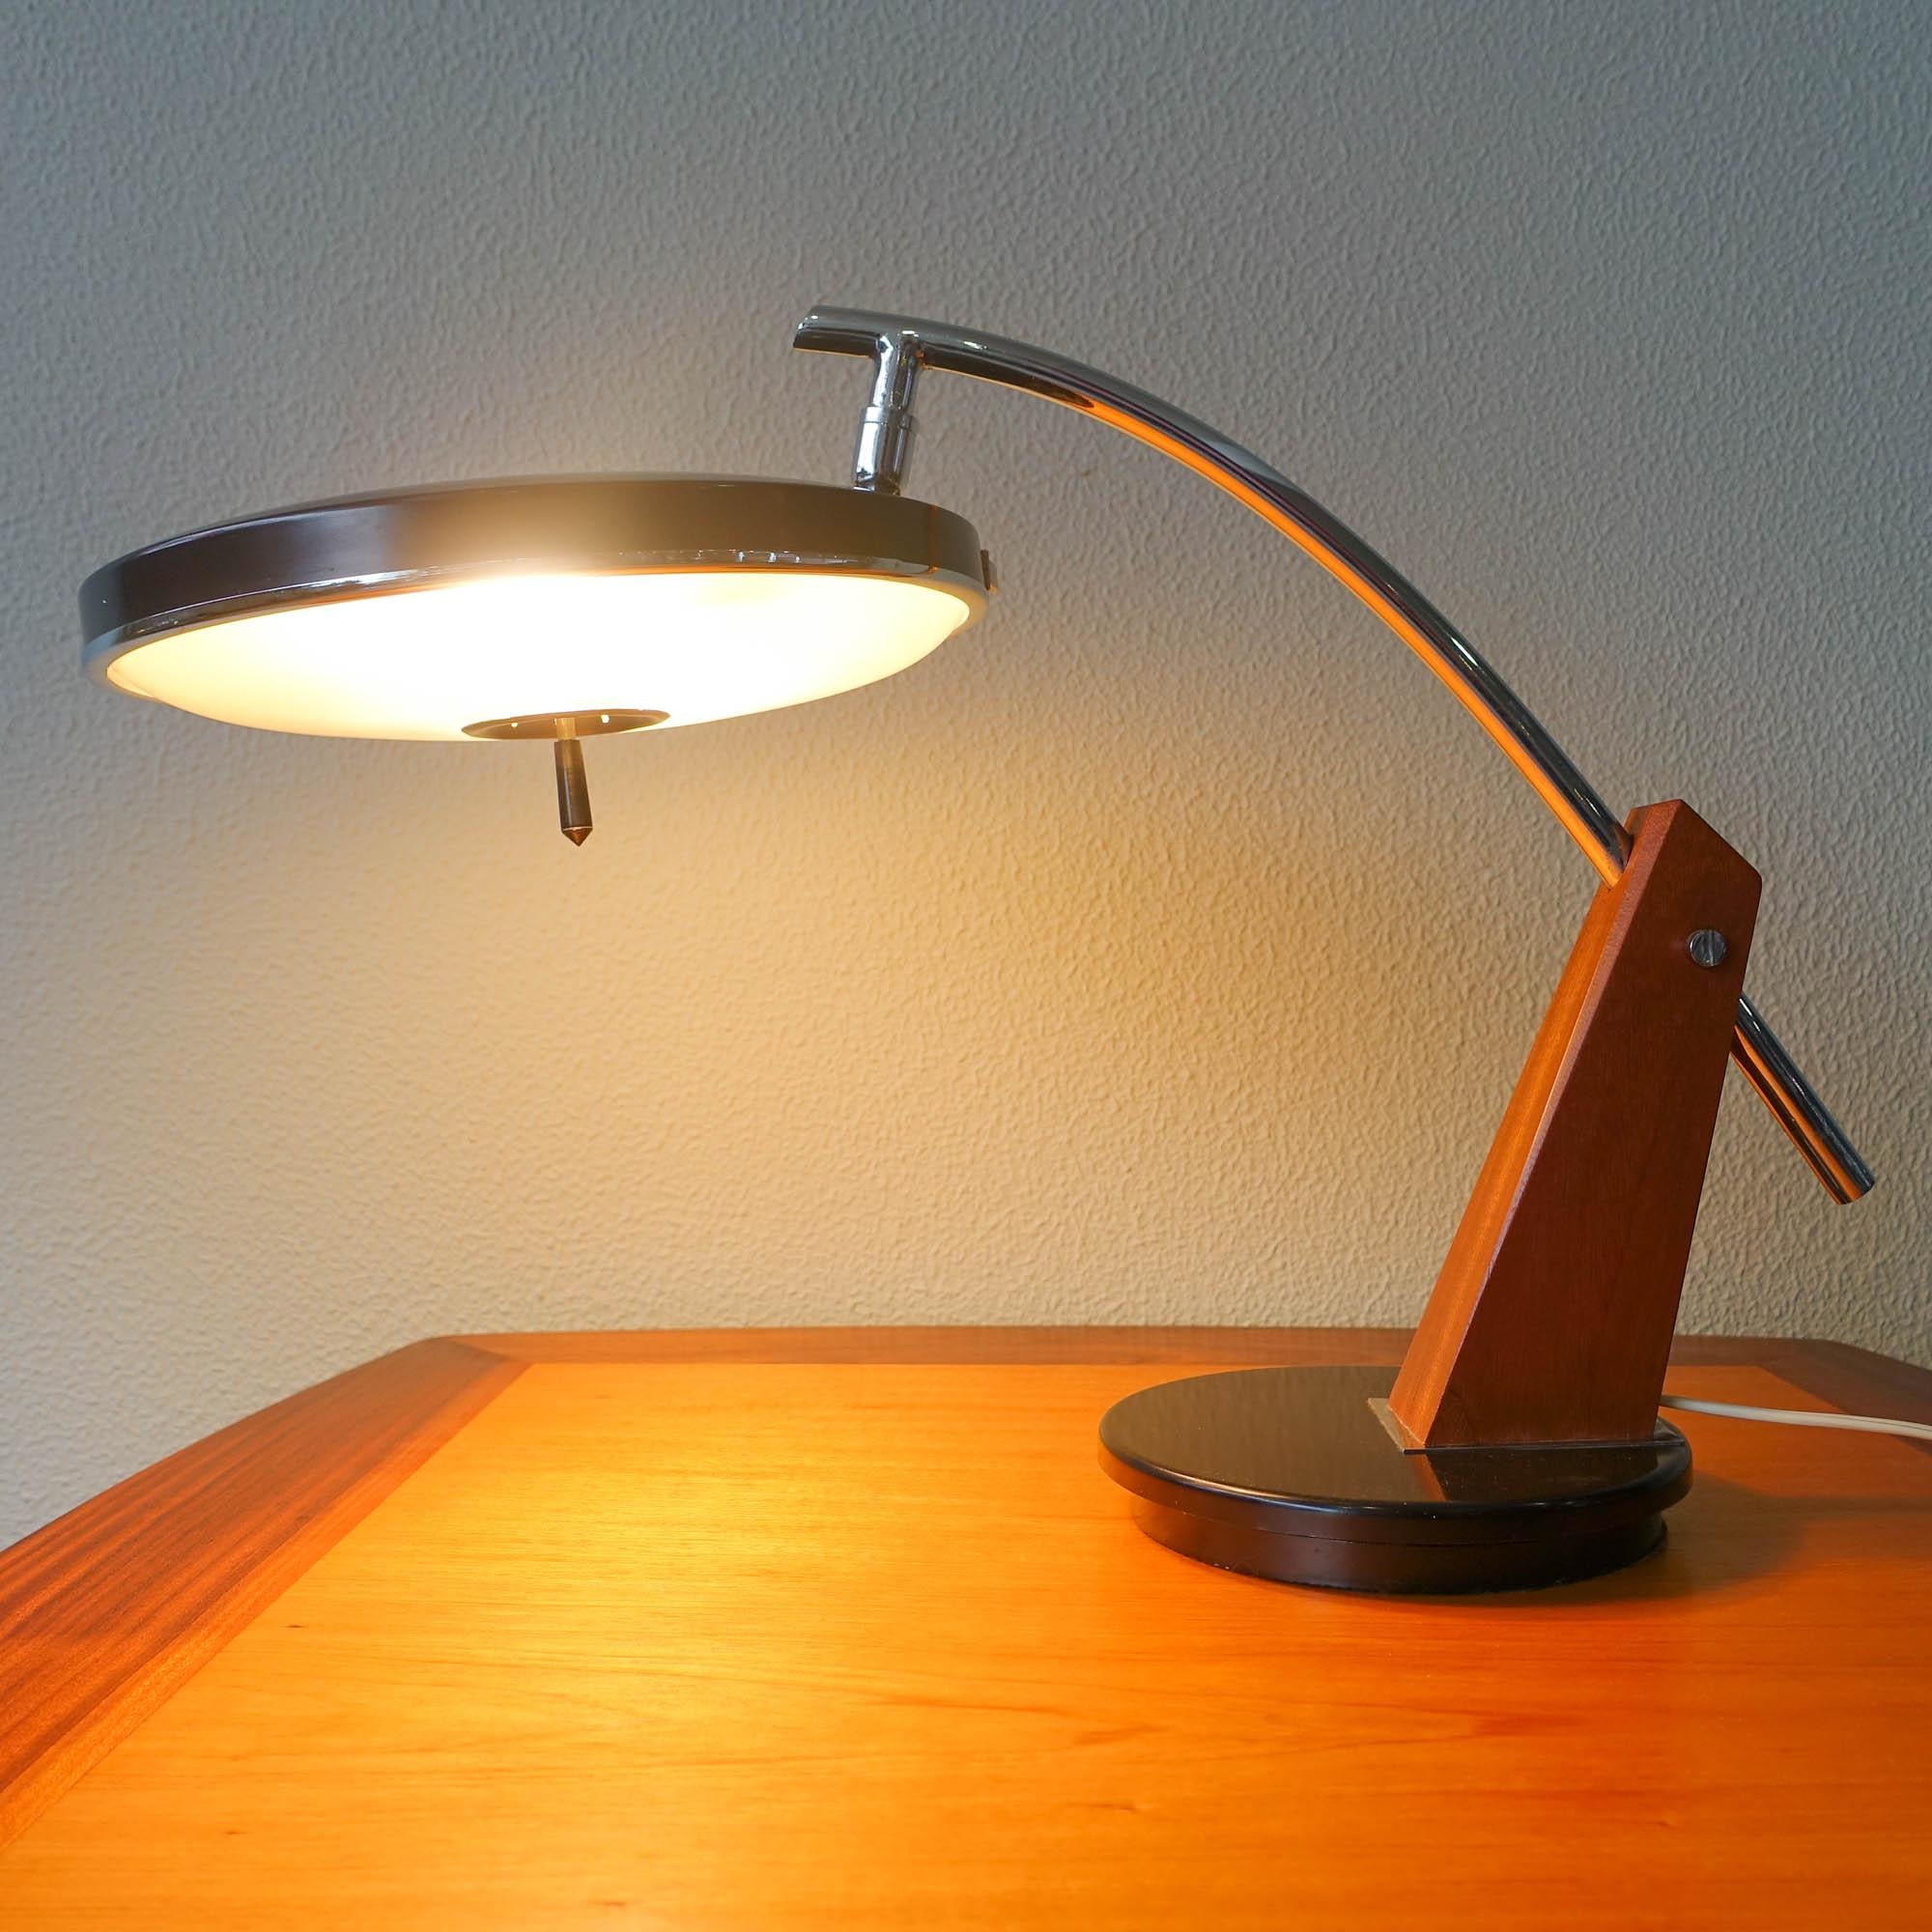 This unusual model of desk lamp was designed and manufactured by Lupela, in Spain during the 1960's. The lamp has a swiveling base and the shade swivels in all directions as well. The arm is a blend of wood and curved chrome rod. It is equipped with